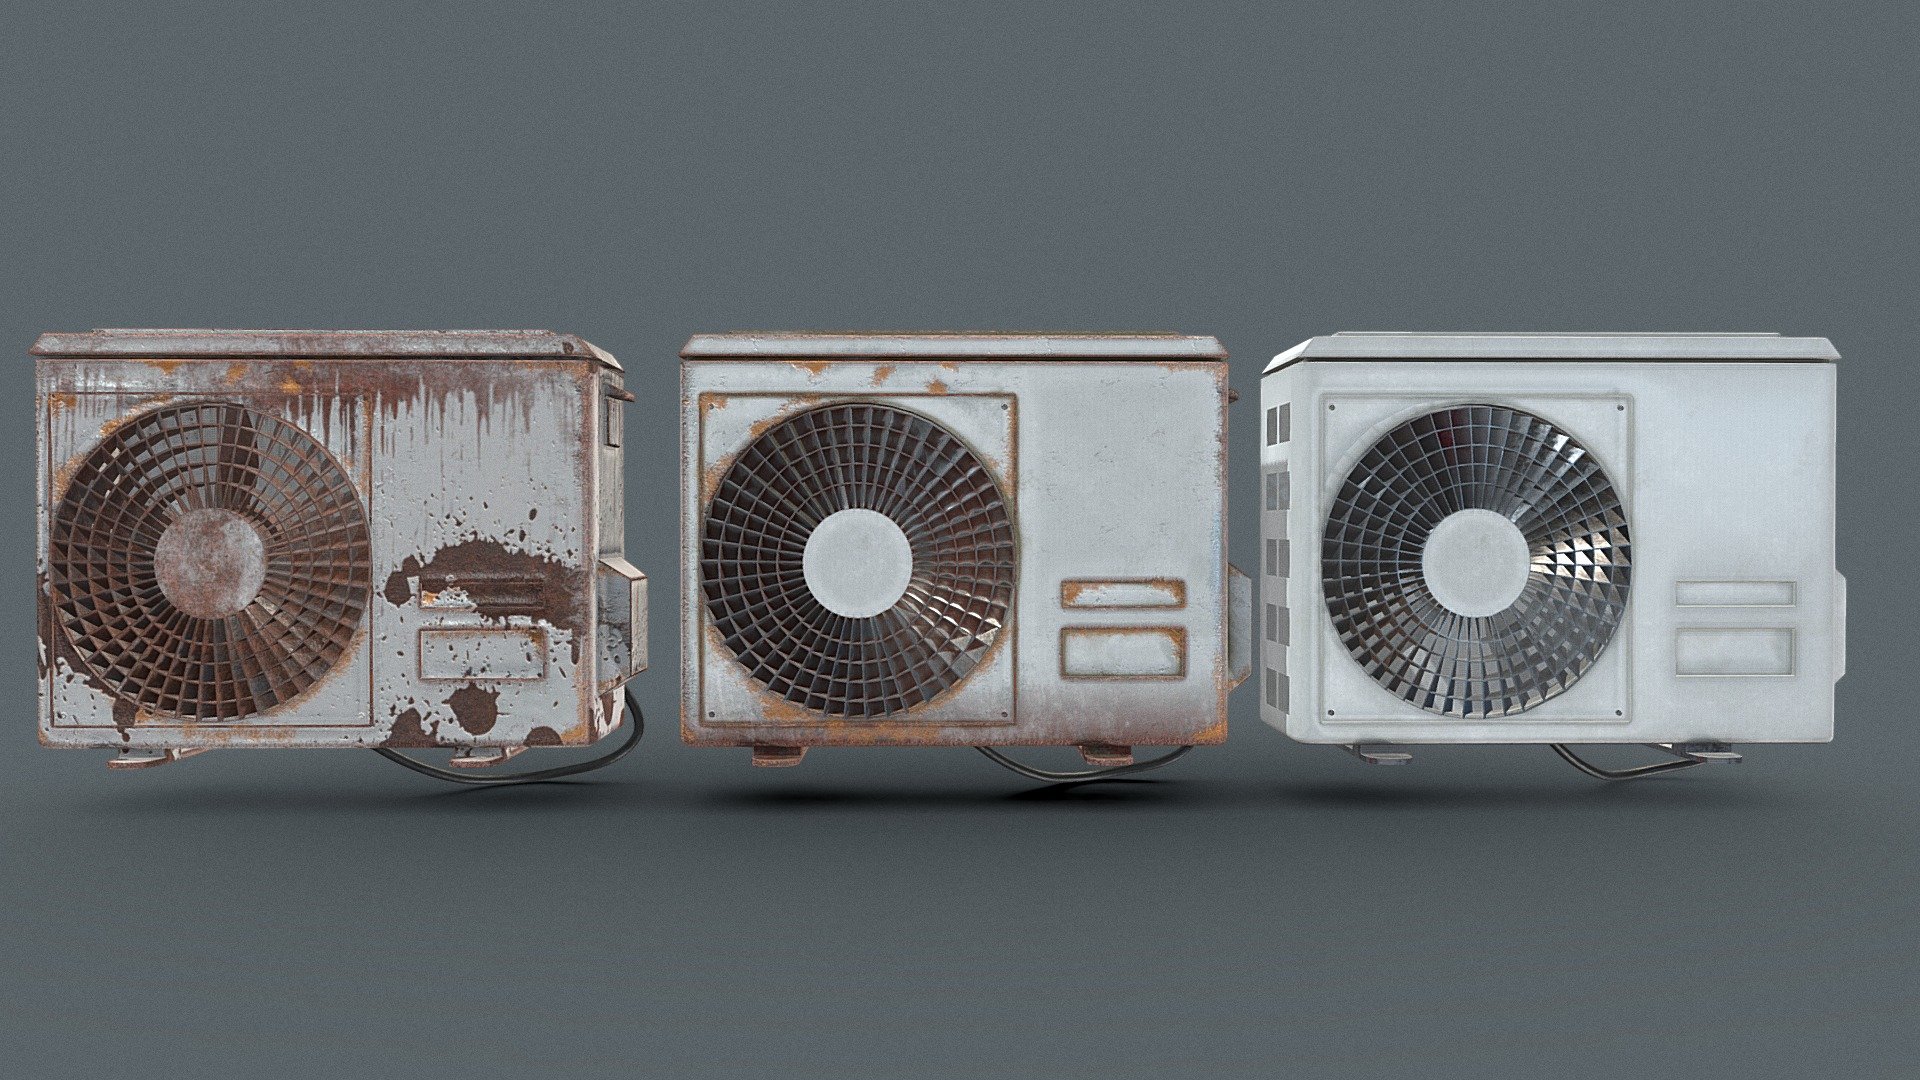 A trio of ourdoor aircon units, suitable for multiple environments for your project. 

Clean
Simple rust
Heavy rust

Comes with 4K PBR textures 3d model